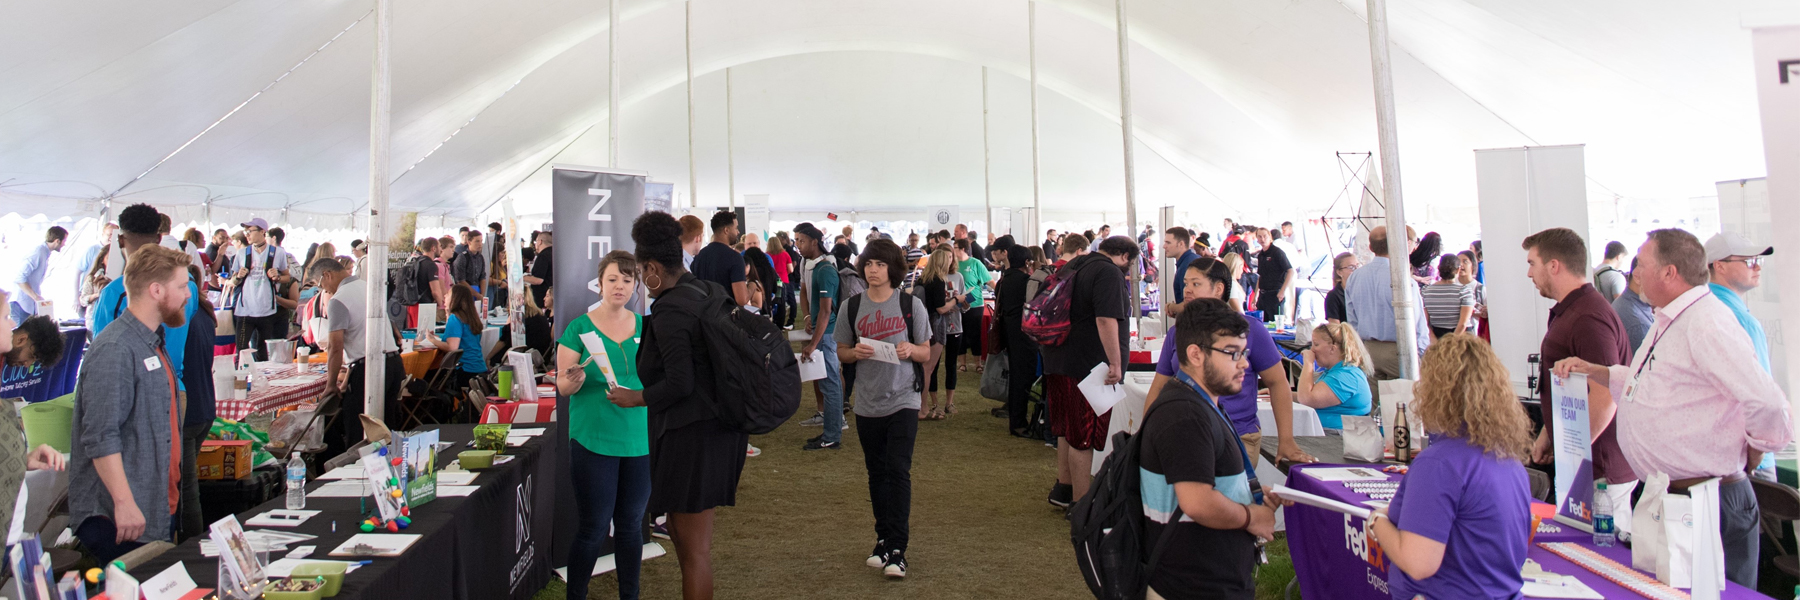 Students, staff, and organizations participating in the Part-Time Job Fair.